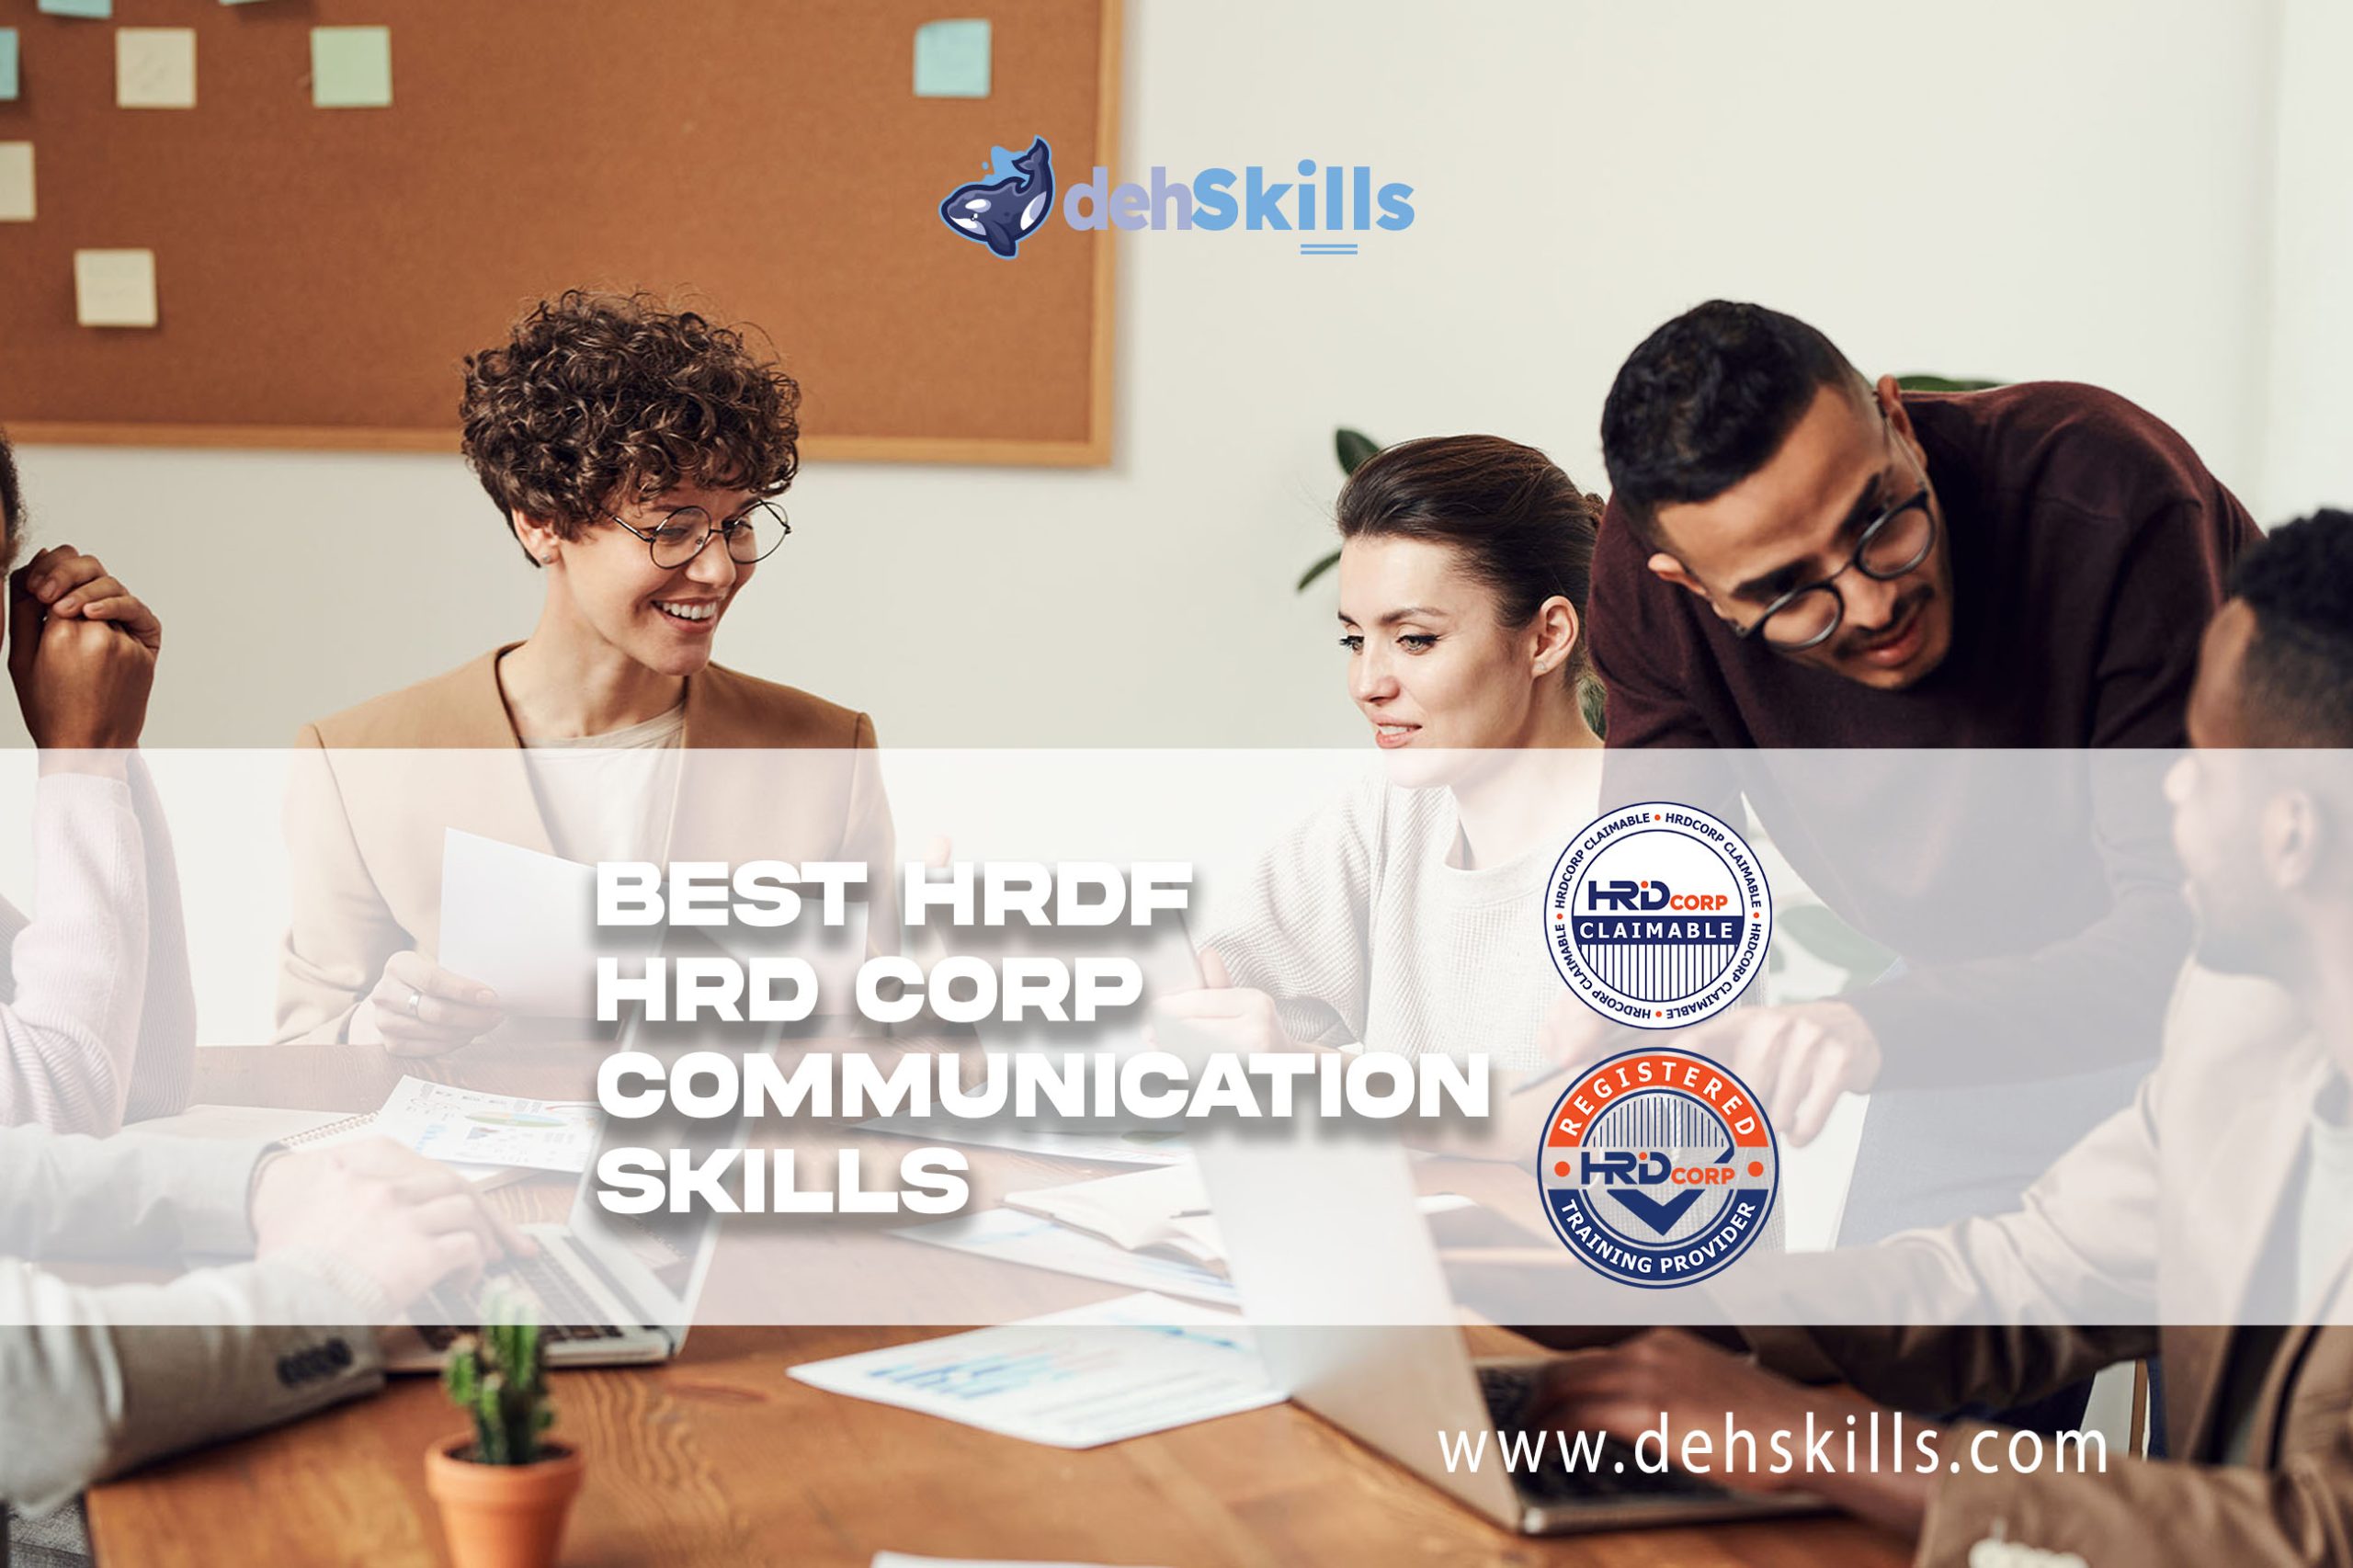 HRDF HRD Corp Claimable Communication Skills Training